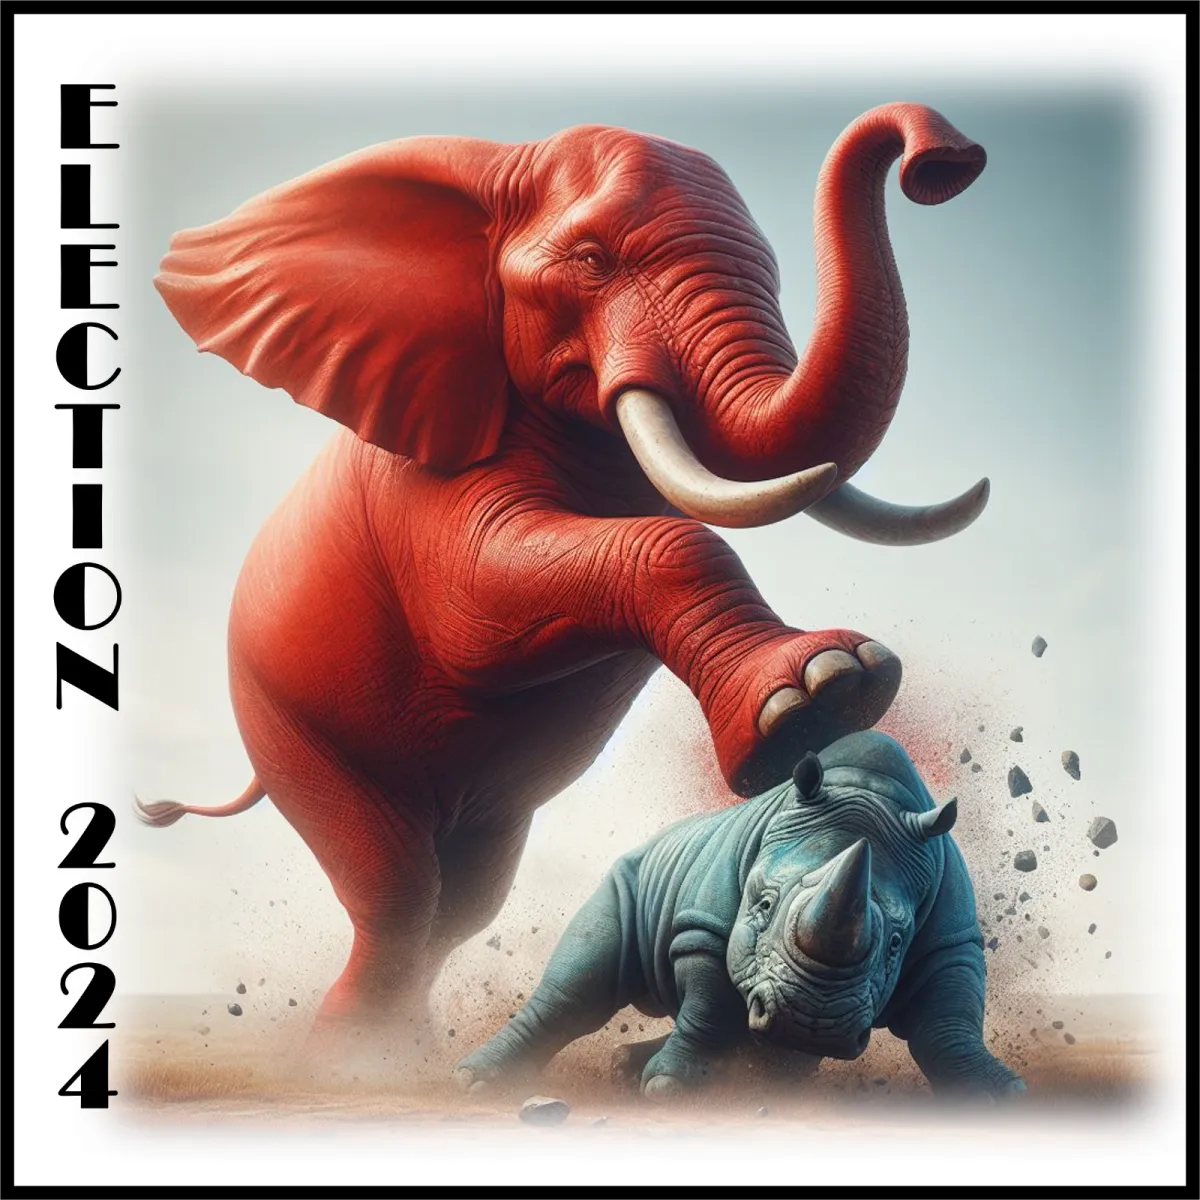 Red Elephant conquering Blue Elephant_ Vote Grassroots